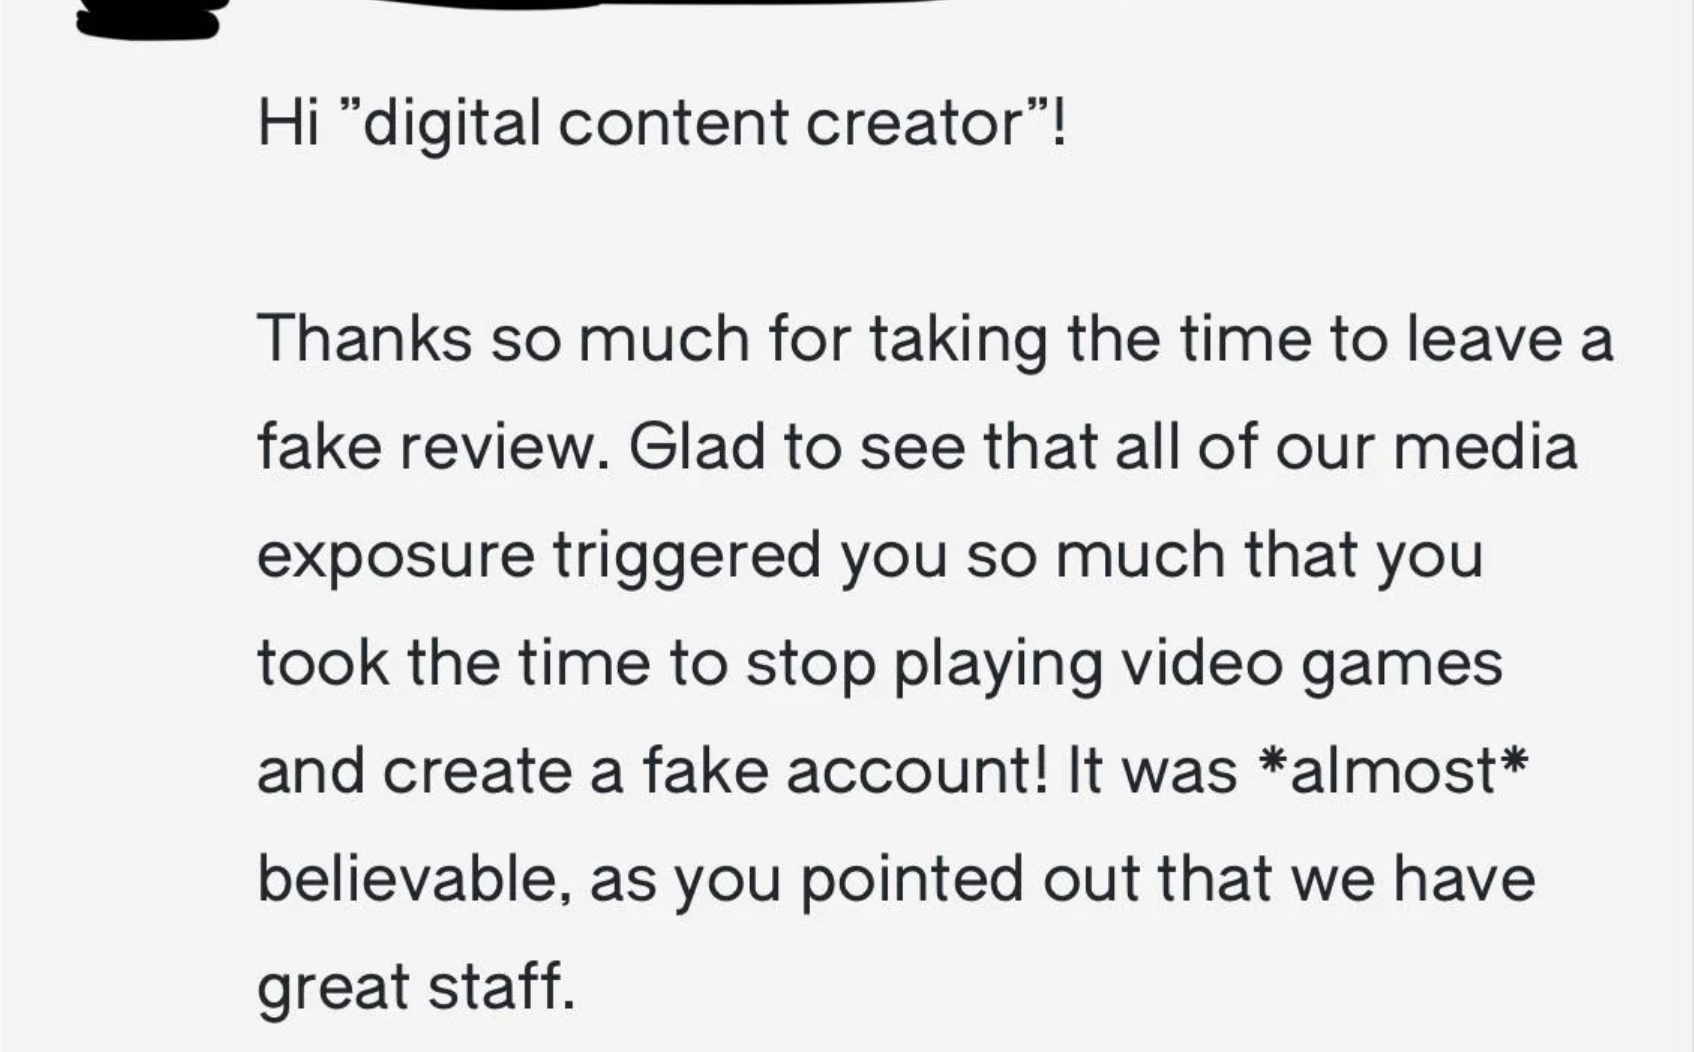 paper - Hi "digital content creator"! Thanks so much for taking the time to leave a fake review. Glad to see that all of our media exposure triggered you so much that you took the time to stop playing video games and create a fake account! It was almost…